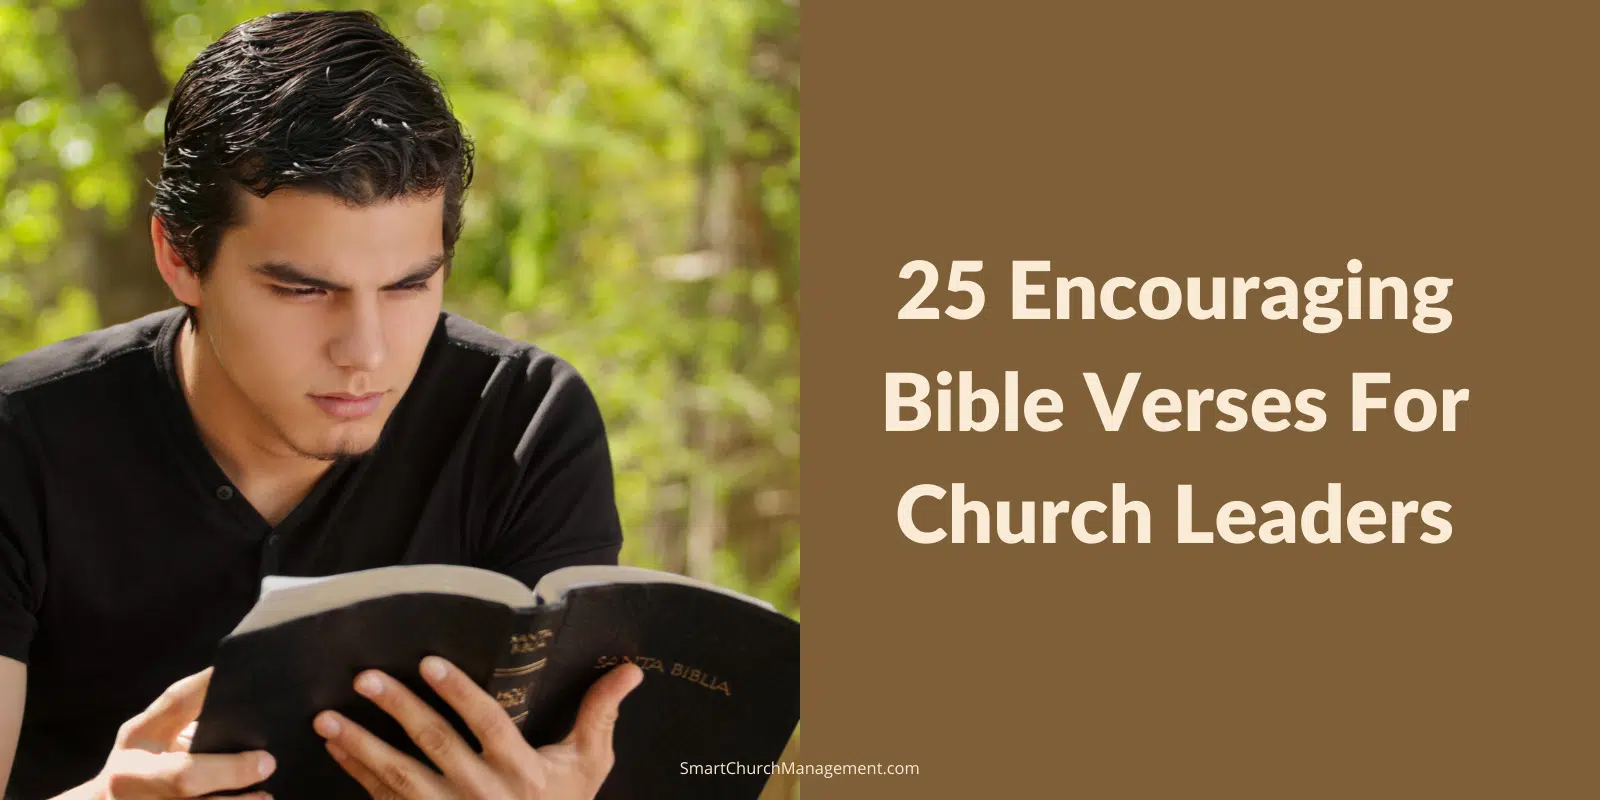 Encouraging Bible verses for church leaders